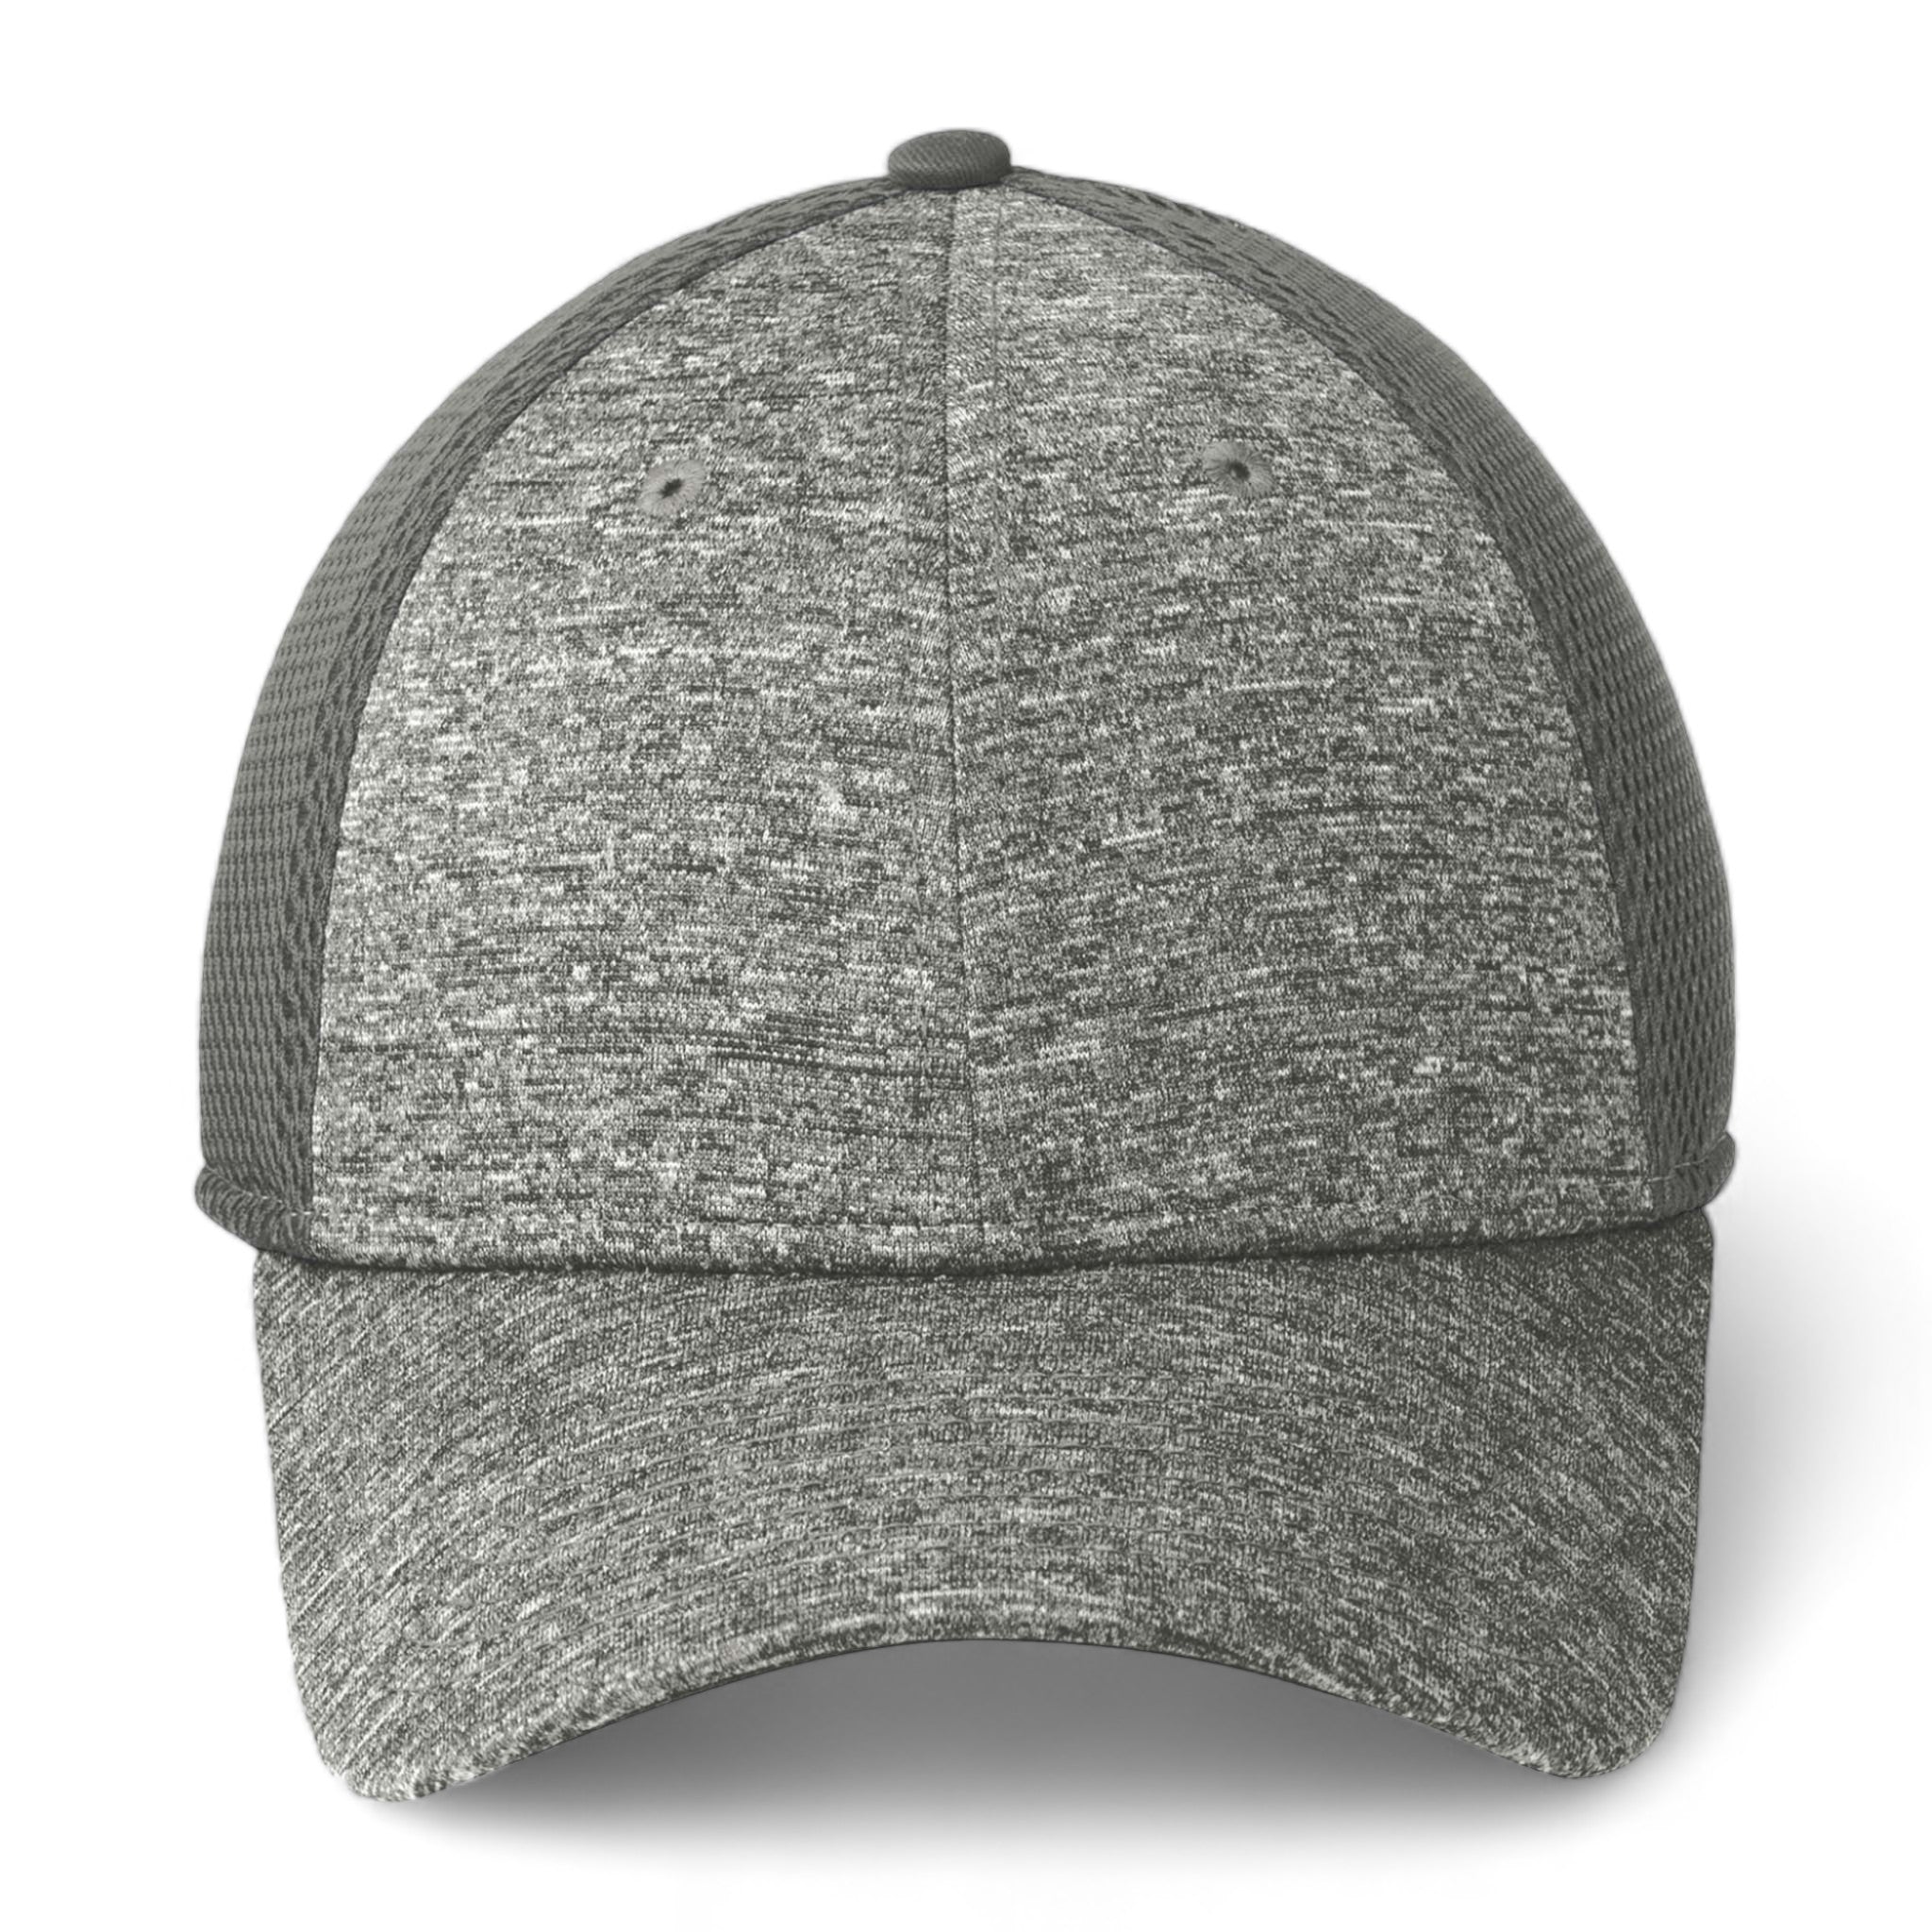 Front view of New Era NE702 custom hat in graphite and shadow heather